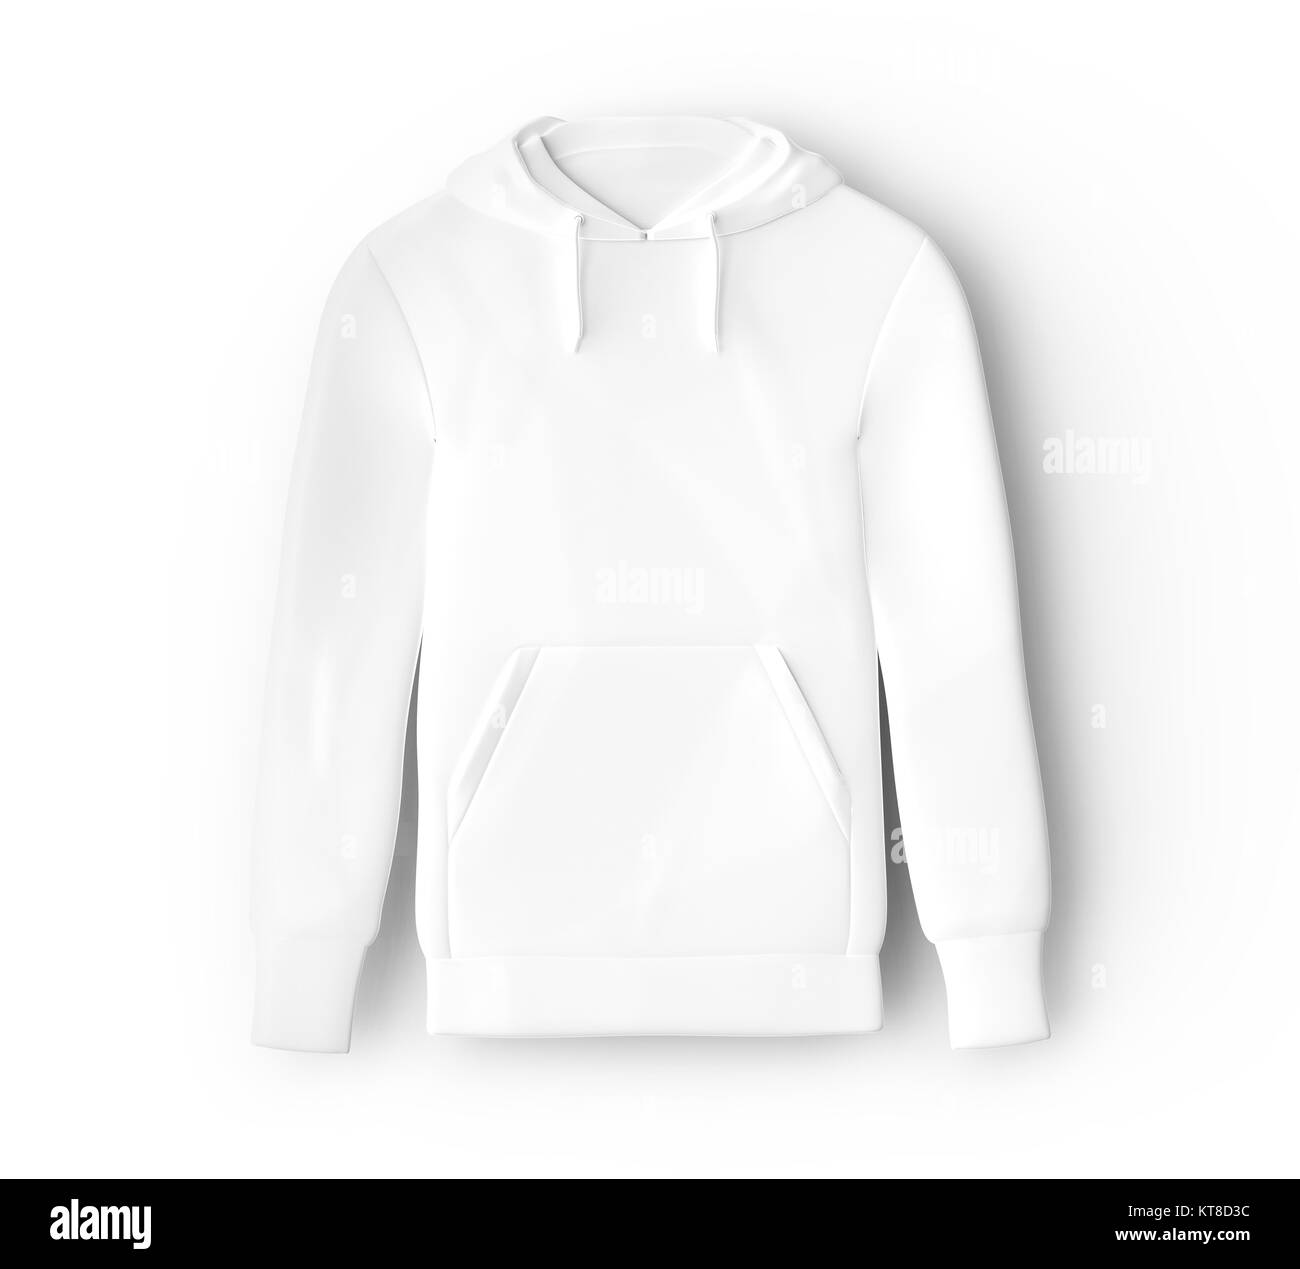 Download Hoodie sweatshirt mockup, blank white cloth template for men isolated Stock Photo: 169830960 - Alamy